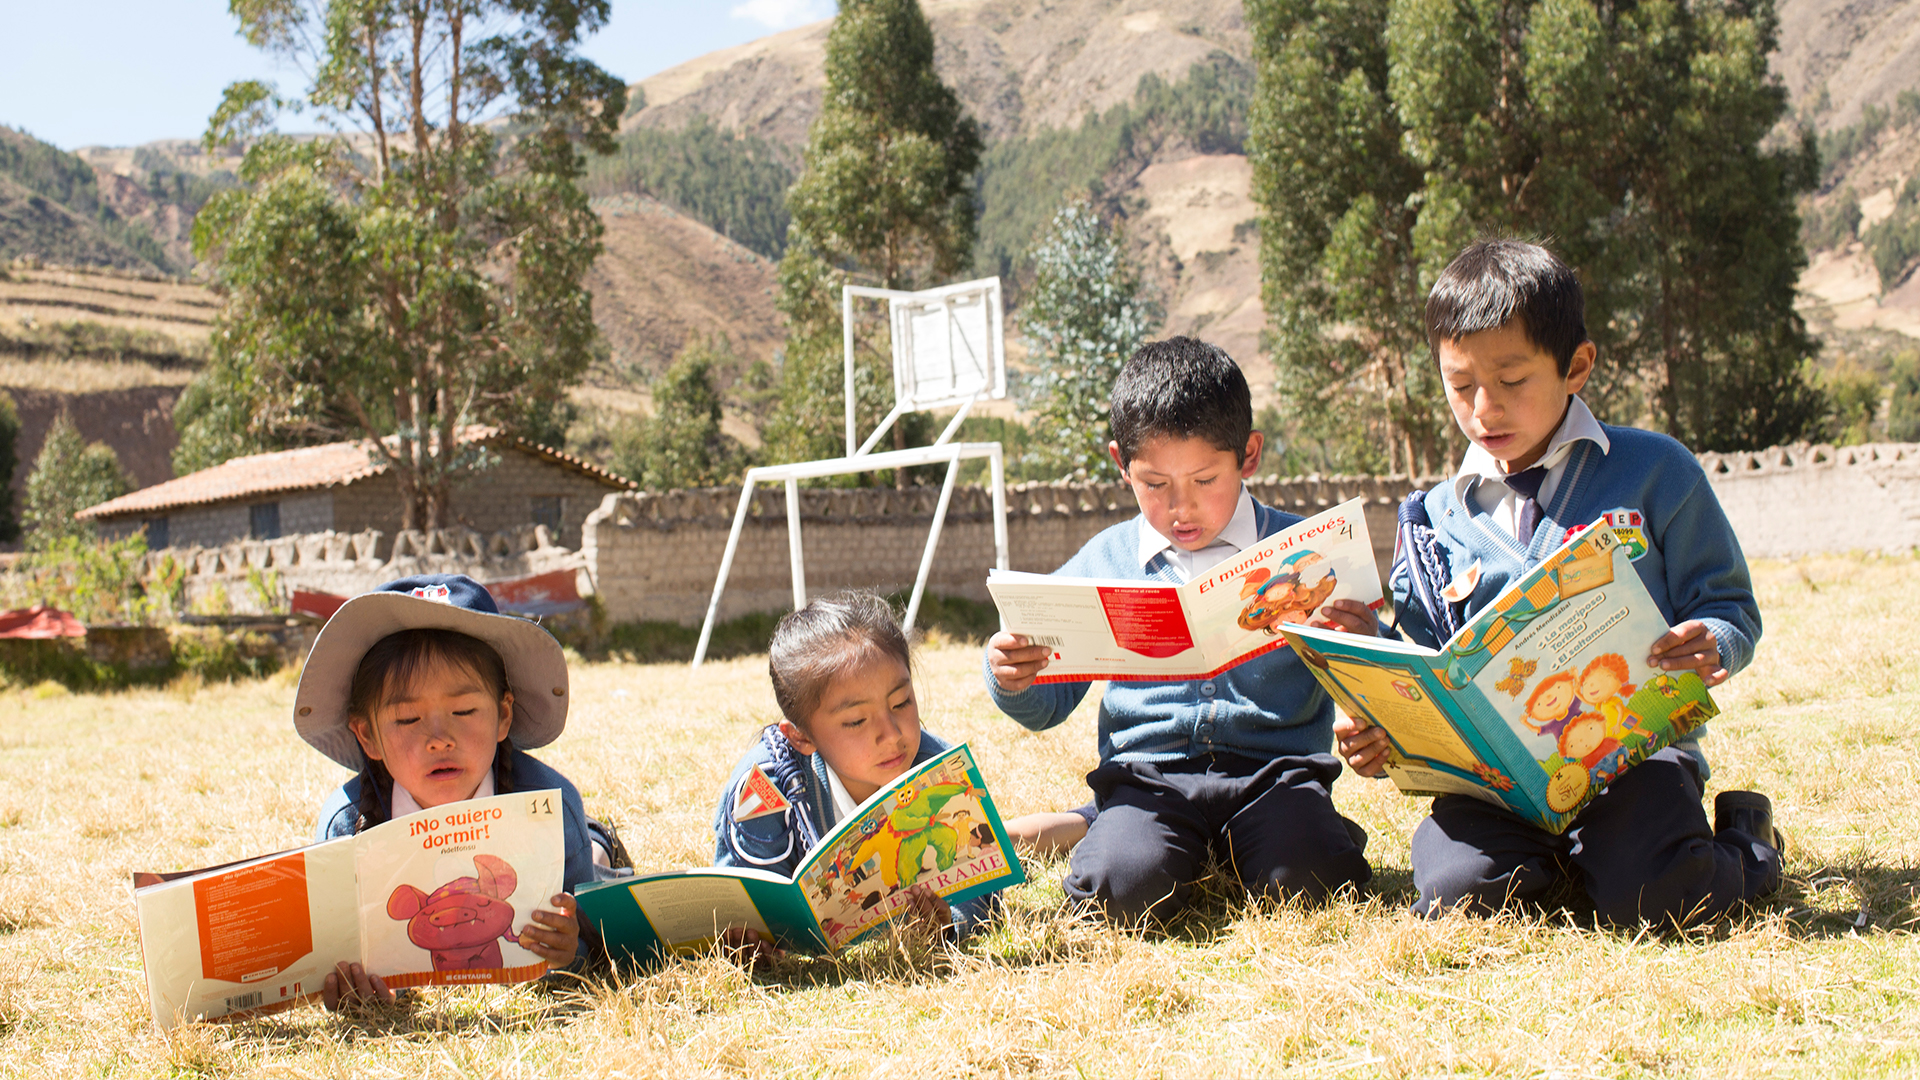 Four young children reading books on a patch of grass outside of a rural school building.